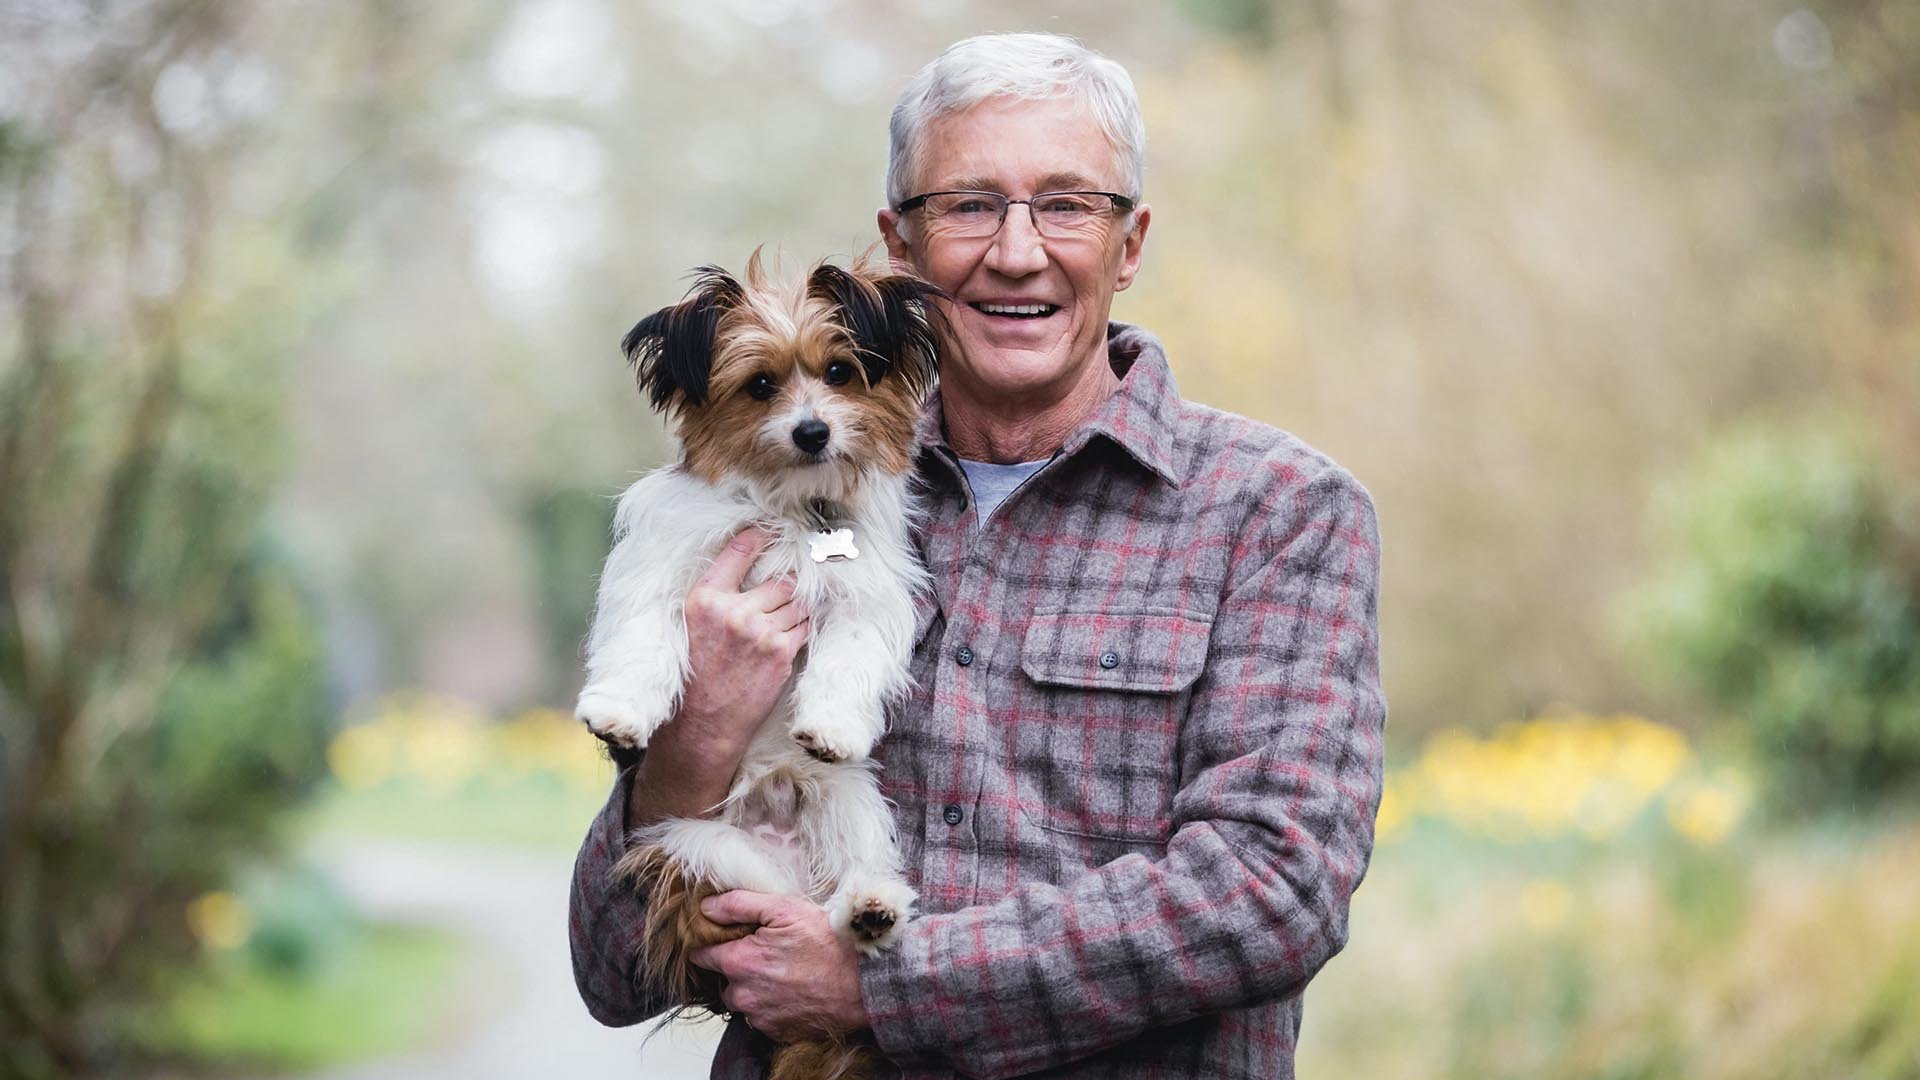 Paul O’Grady: ‘I could milk a cow by the time I was seven’